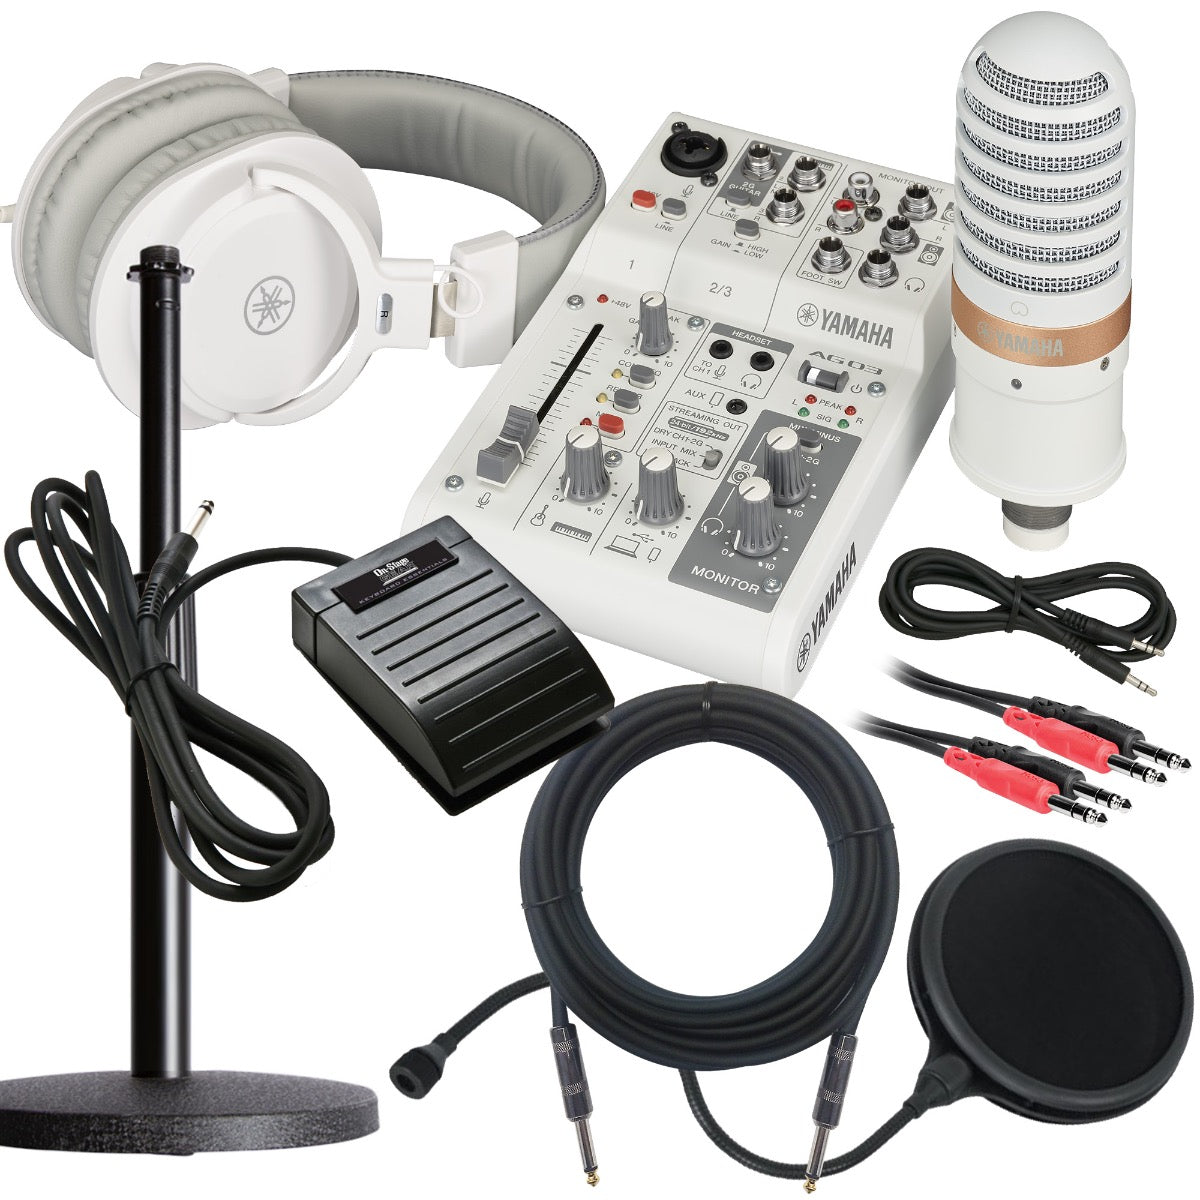 Collage of the components in the Yamaha AG03 MK2 Live Streaming Pack - White STUDIO KIT bundle